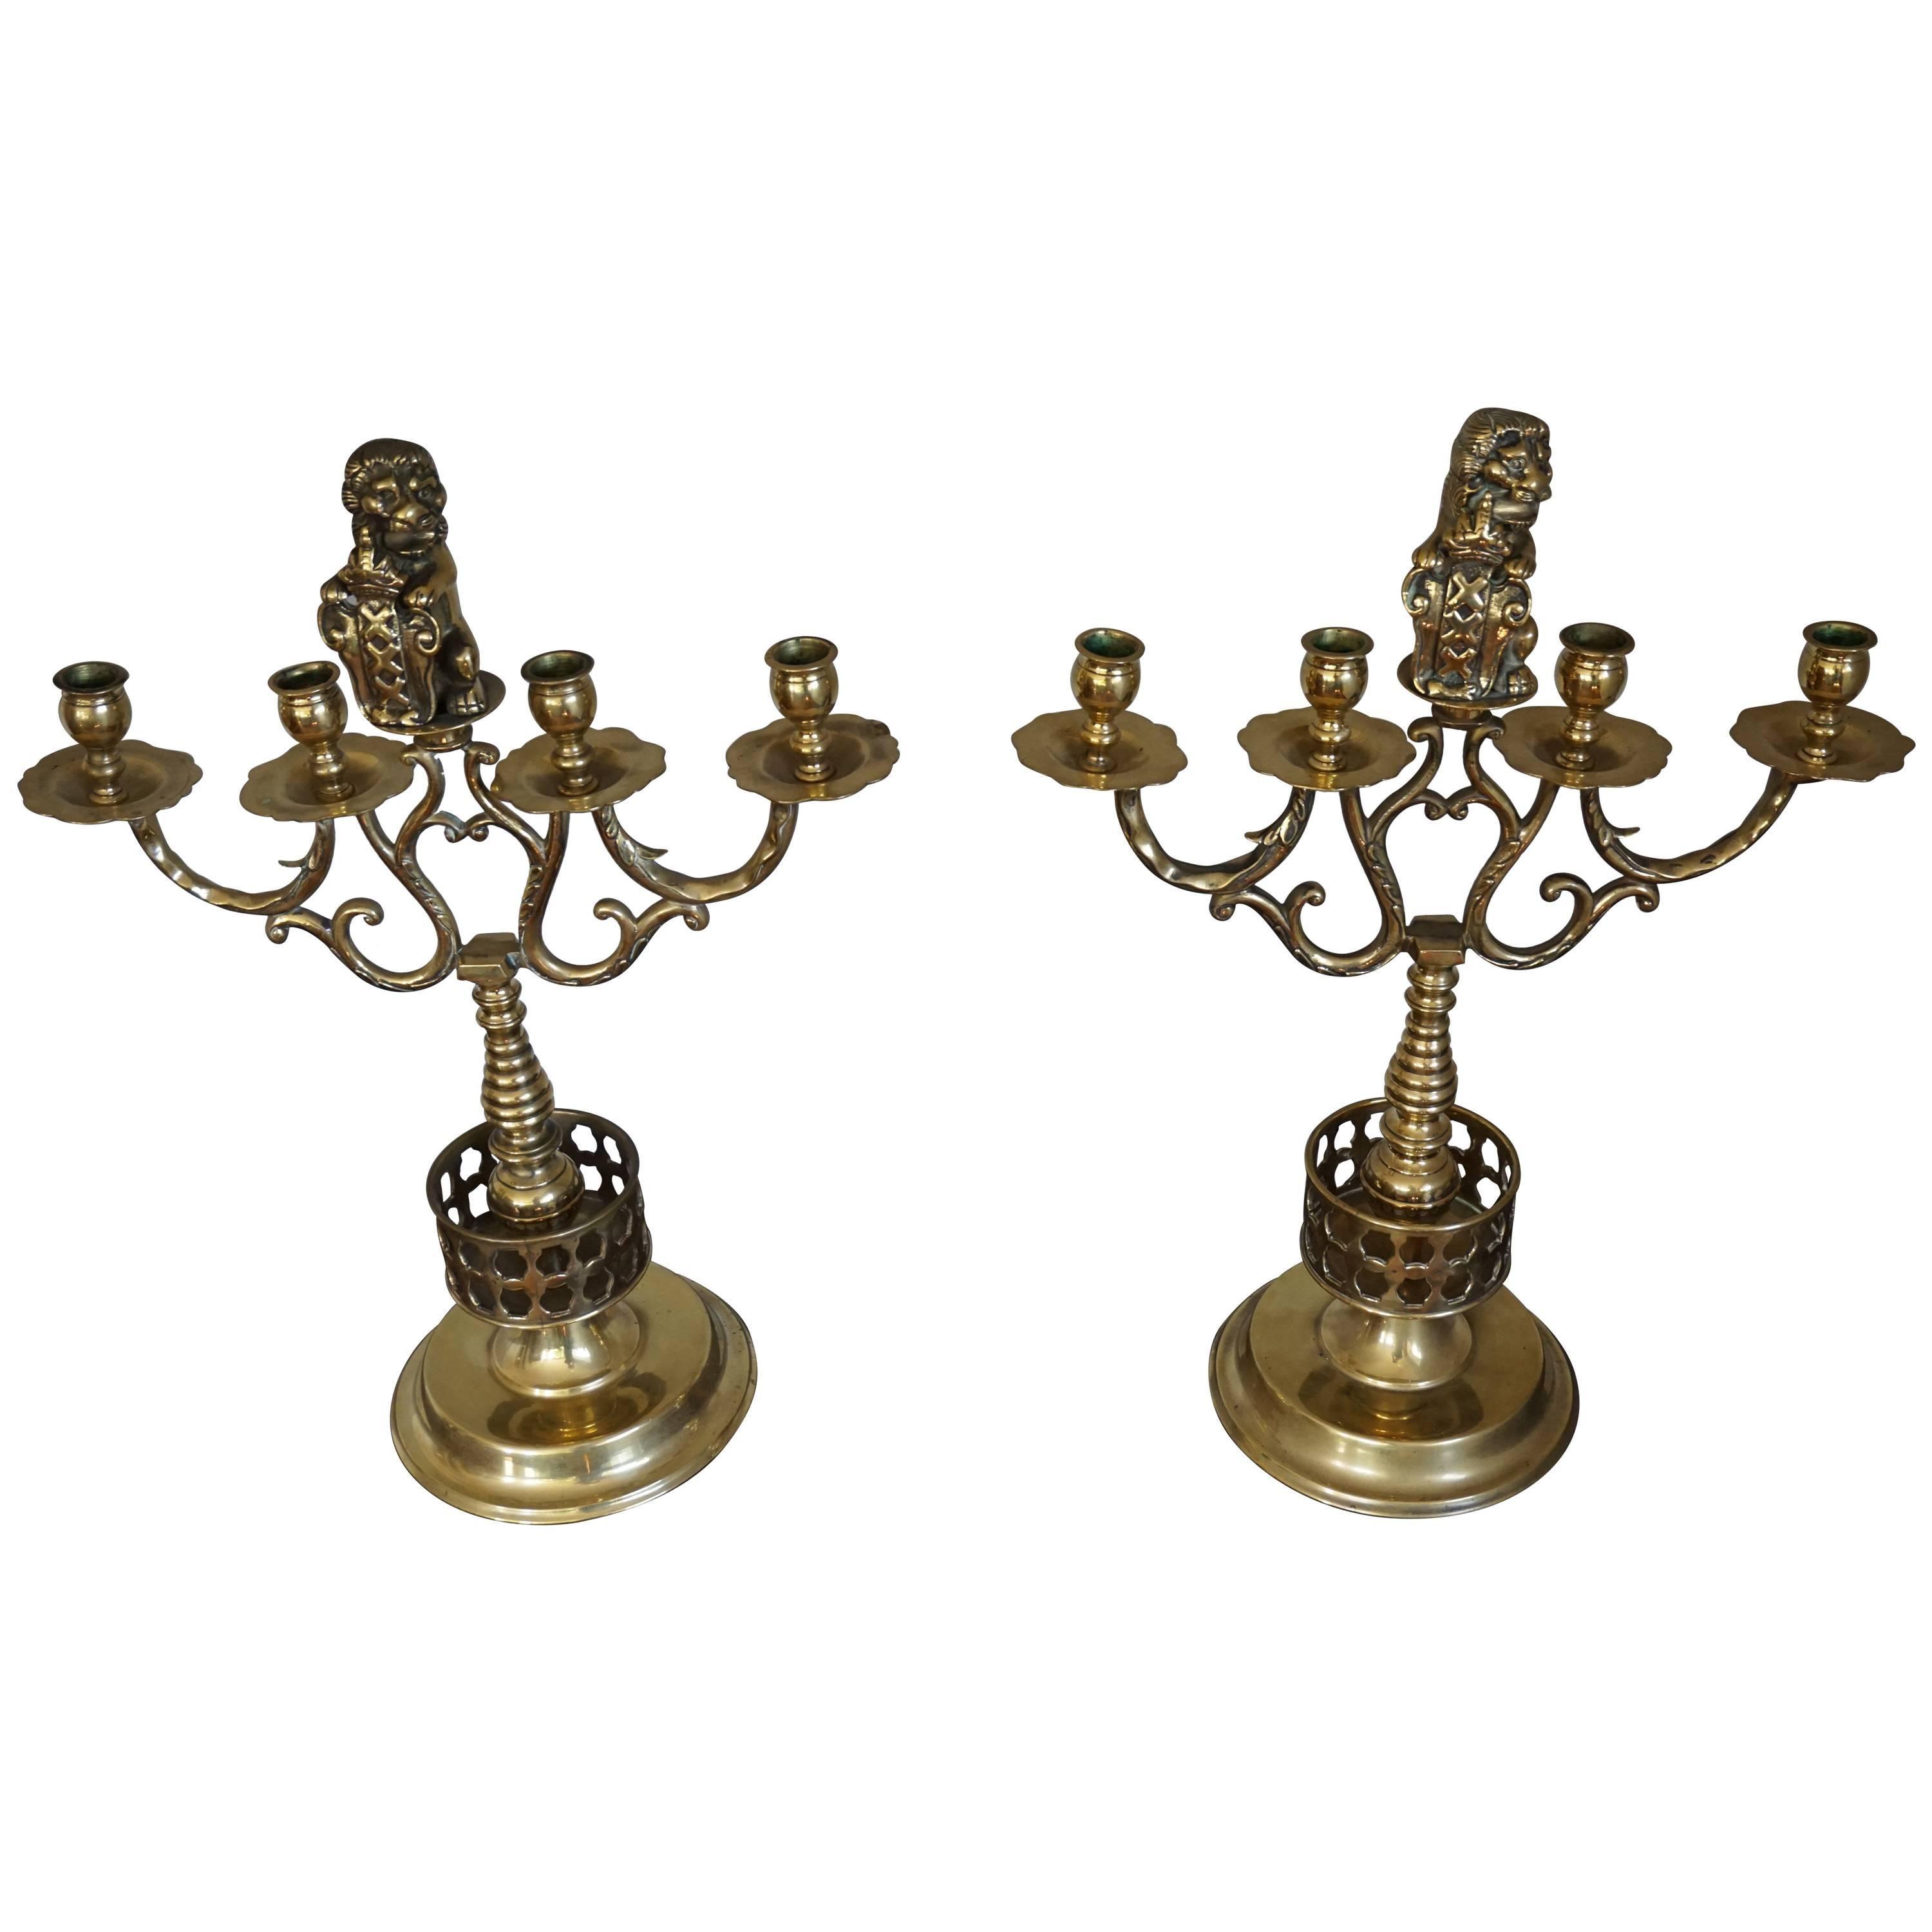 Large Pair of Brass Candelabras with Lions Holding the Coat of Arms of Amsterdam